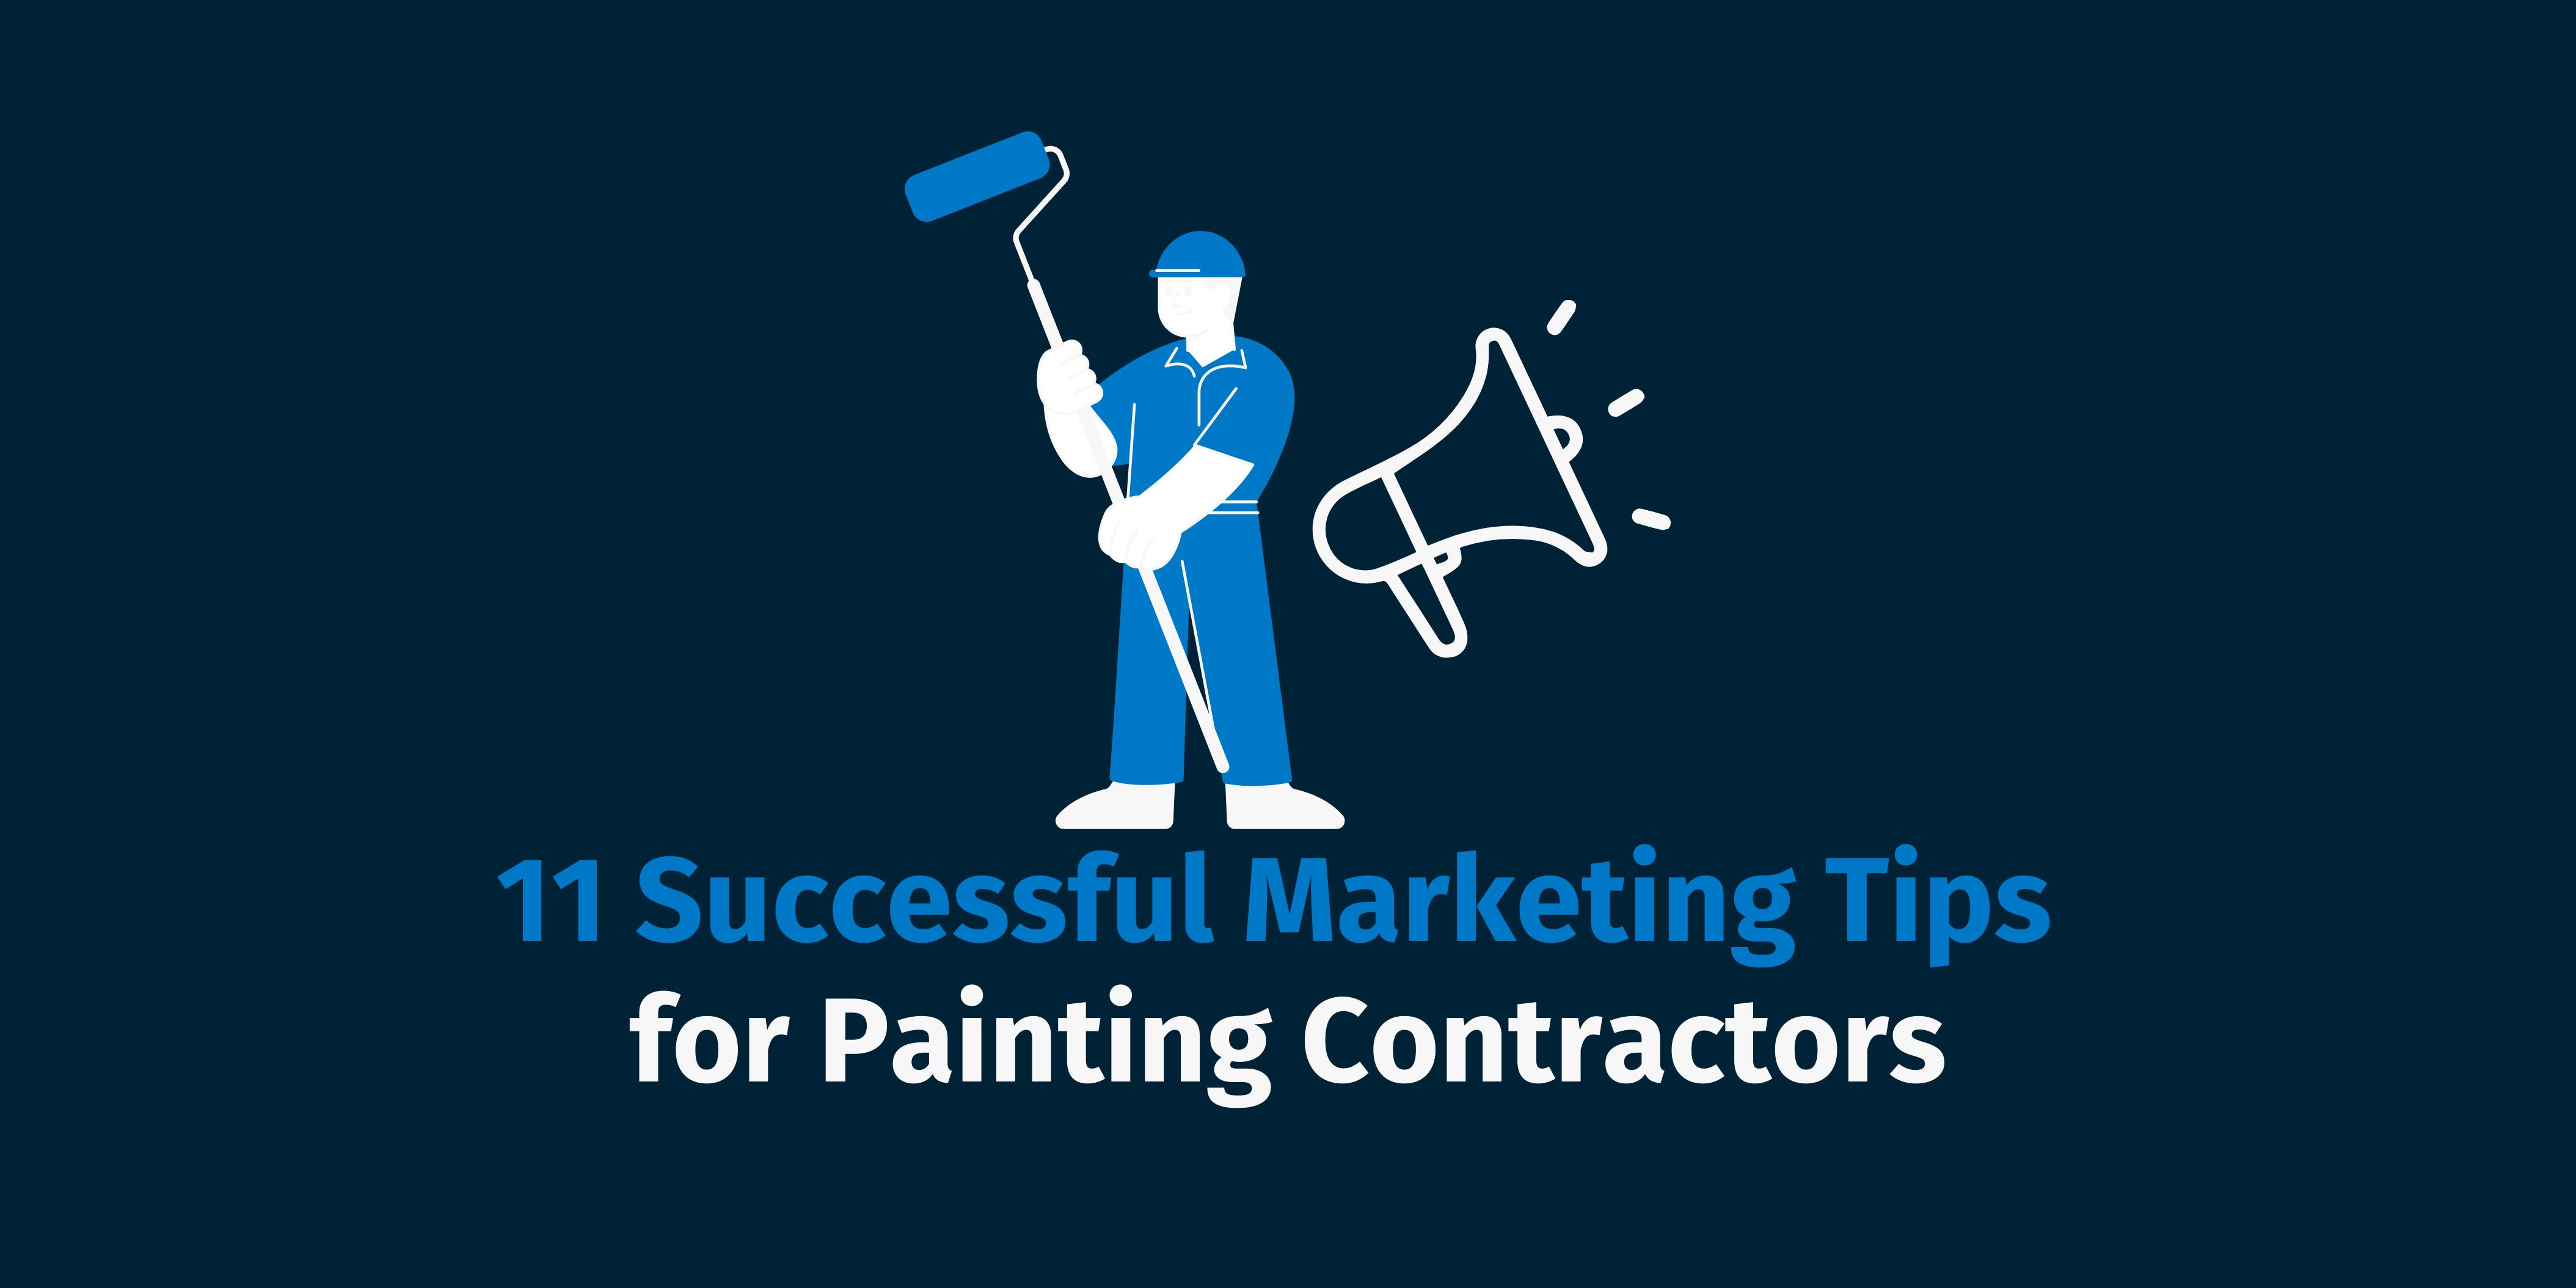 Marketing Tips for Painting Contractors